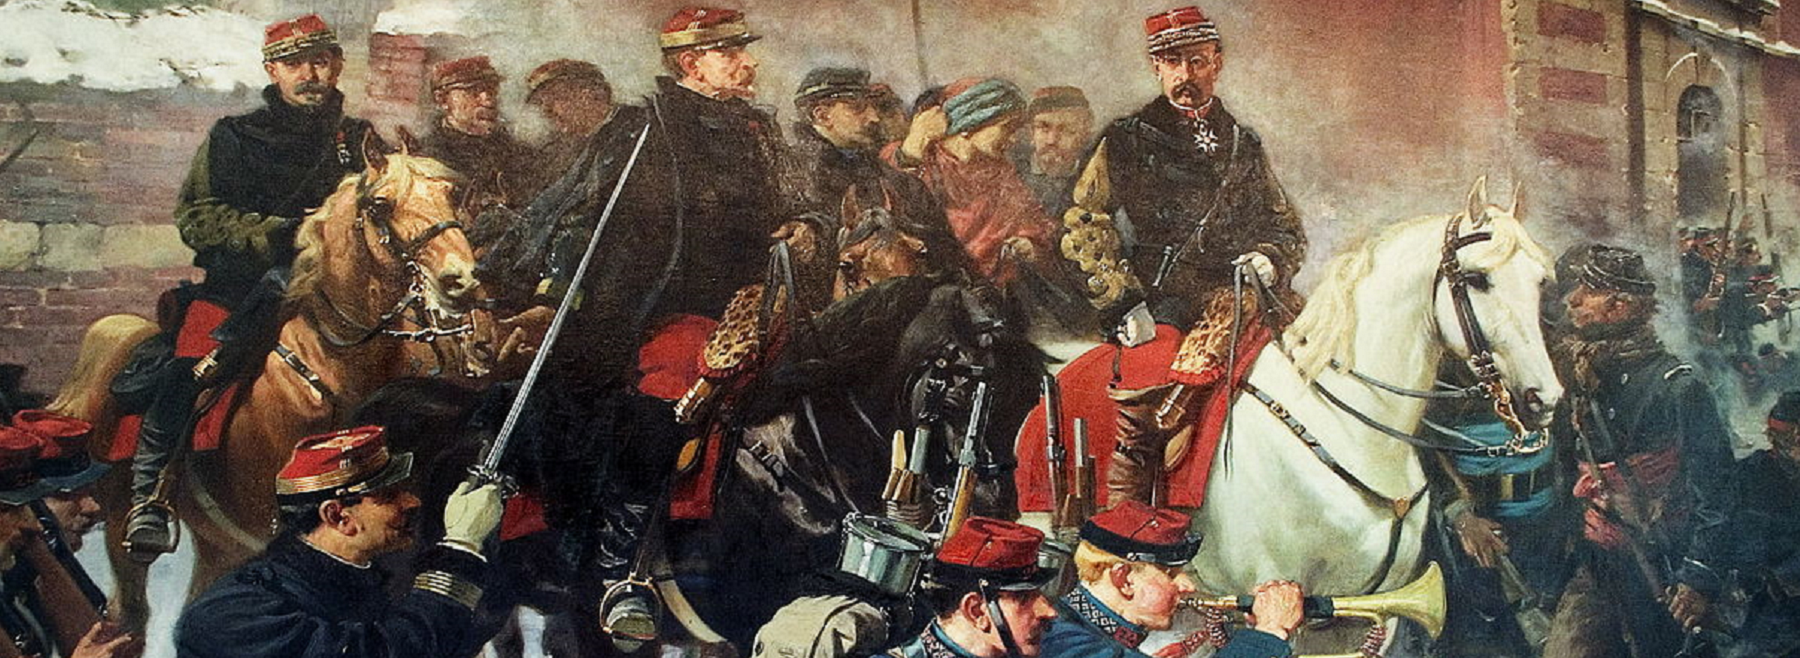 The Franco-Prussian War The German Conquest of France in 1870-1871 